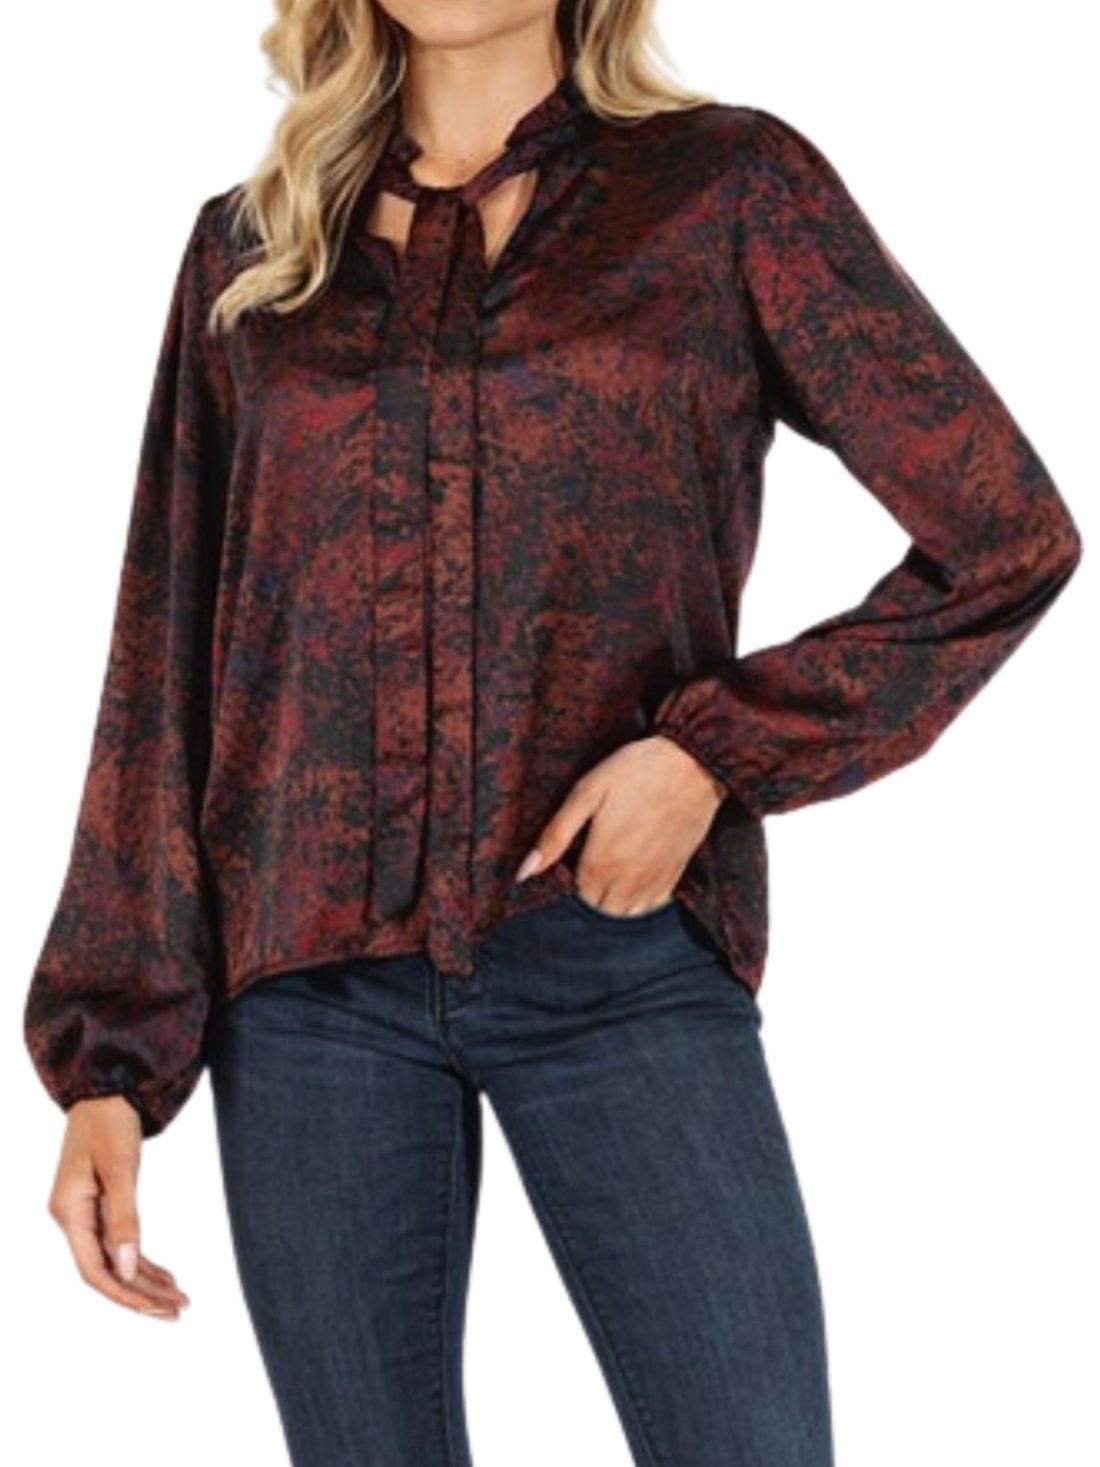 veronica m tie neck blouse in randall print